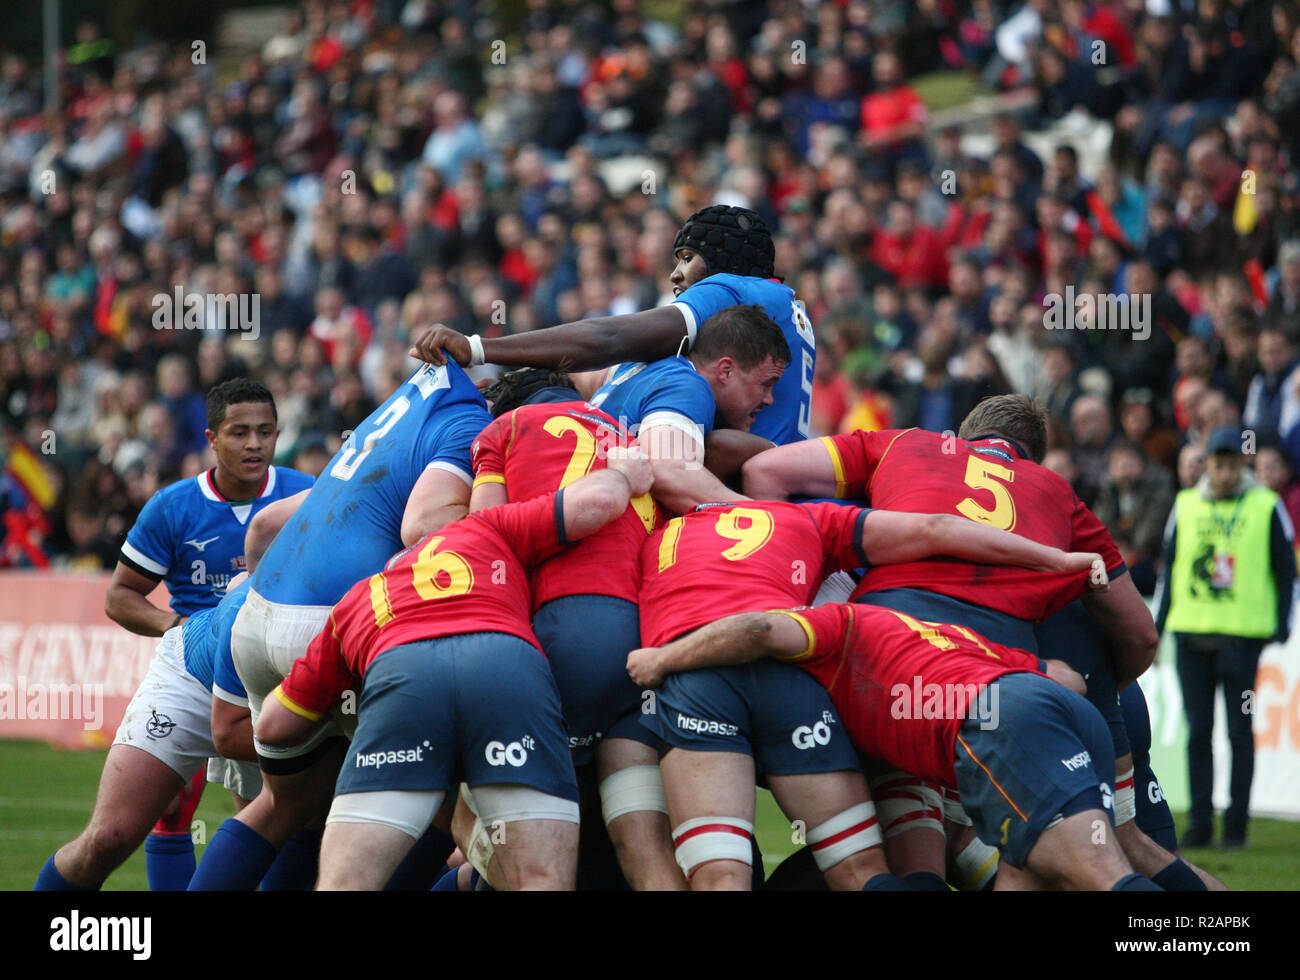 Madrid, Spain. 18/11/2018, Rugby Test Match  Tijue Uanivi of Namibia,in game action during  the match between Spain-Namibia to Universidad Complutence Stadium,to Madrid Spain. Credit: Leo Cavallo/Alamy Live News Stock Photo